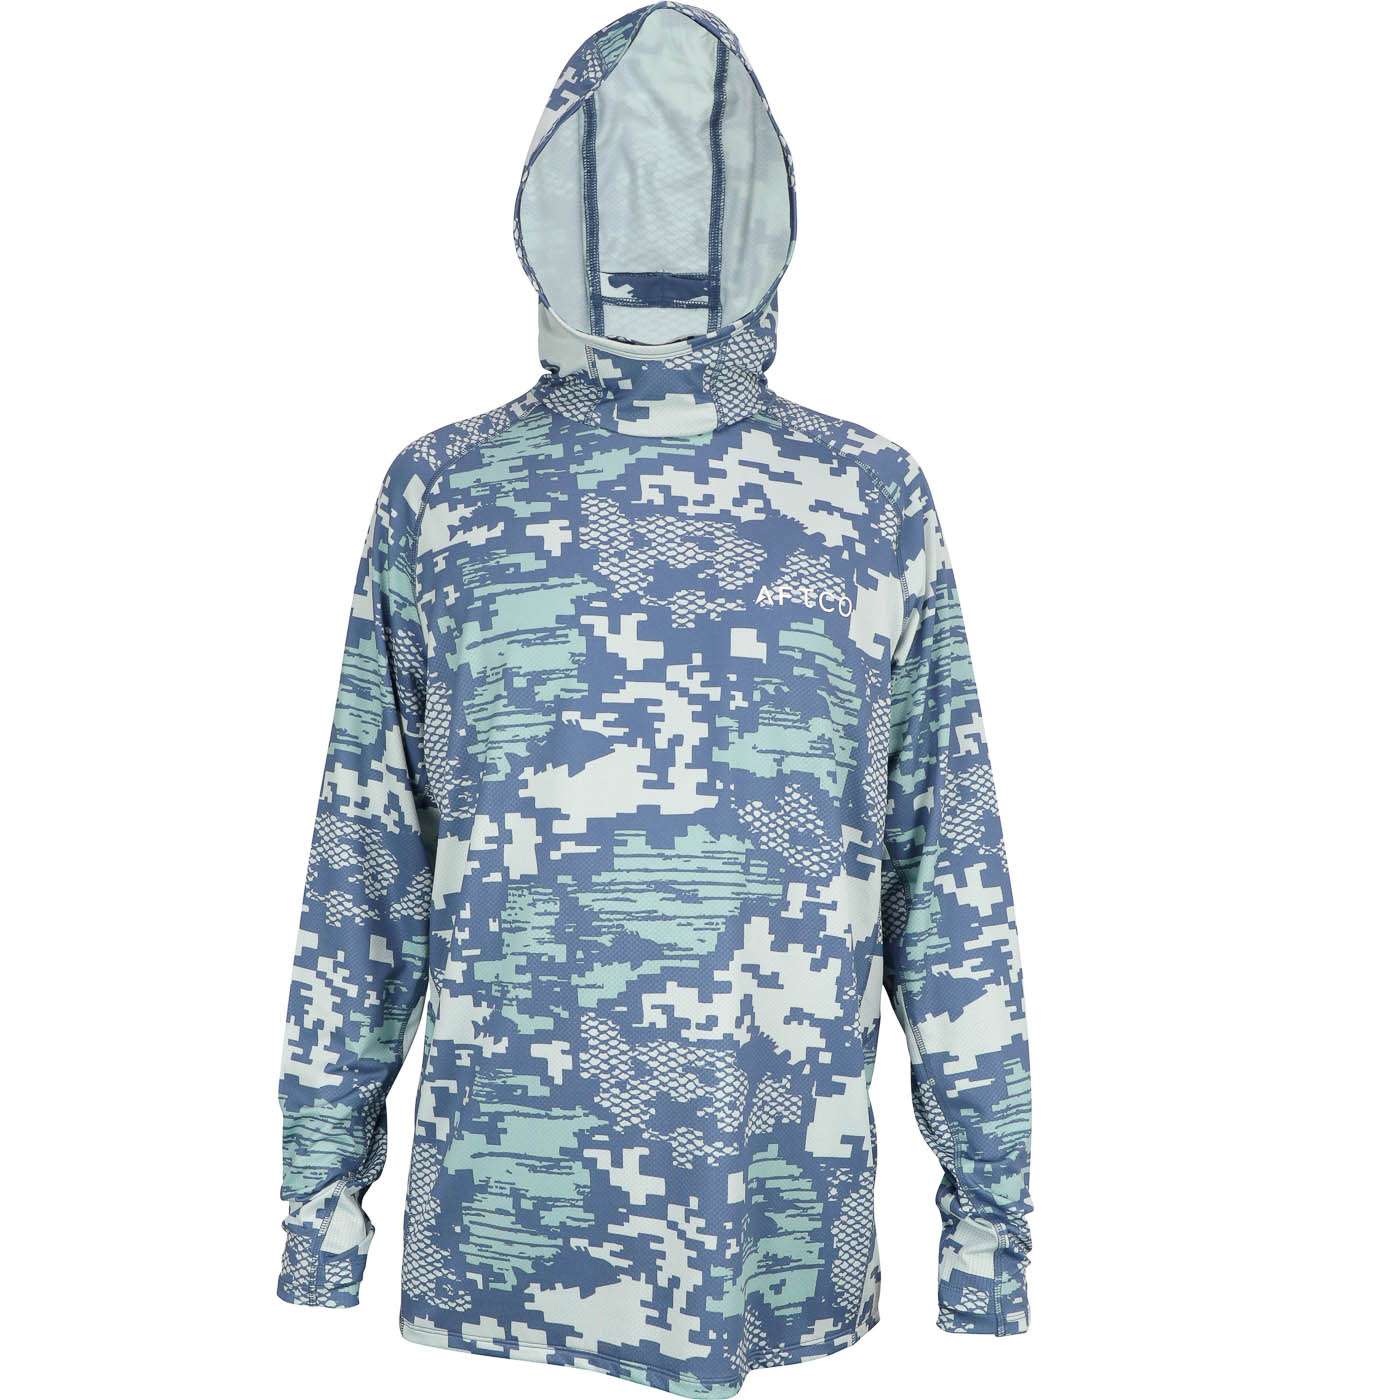 <p><strong>AFTCO Adapt Tactical Phase Change Hooded Shirt</strong></p><p>Adaptâs bio-based phase change fabric delivers âintelligentâ technology that automatically reacts to changes in body temperature with dynamic cooling or warming. Essential features include UPF 50 to ensures optimal sun protection, SpeedVent active hood, integrated ergonomic face mask, mesh ventilation panels, thumb holes, and a custom tactical camo print. $85. <a href=